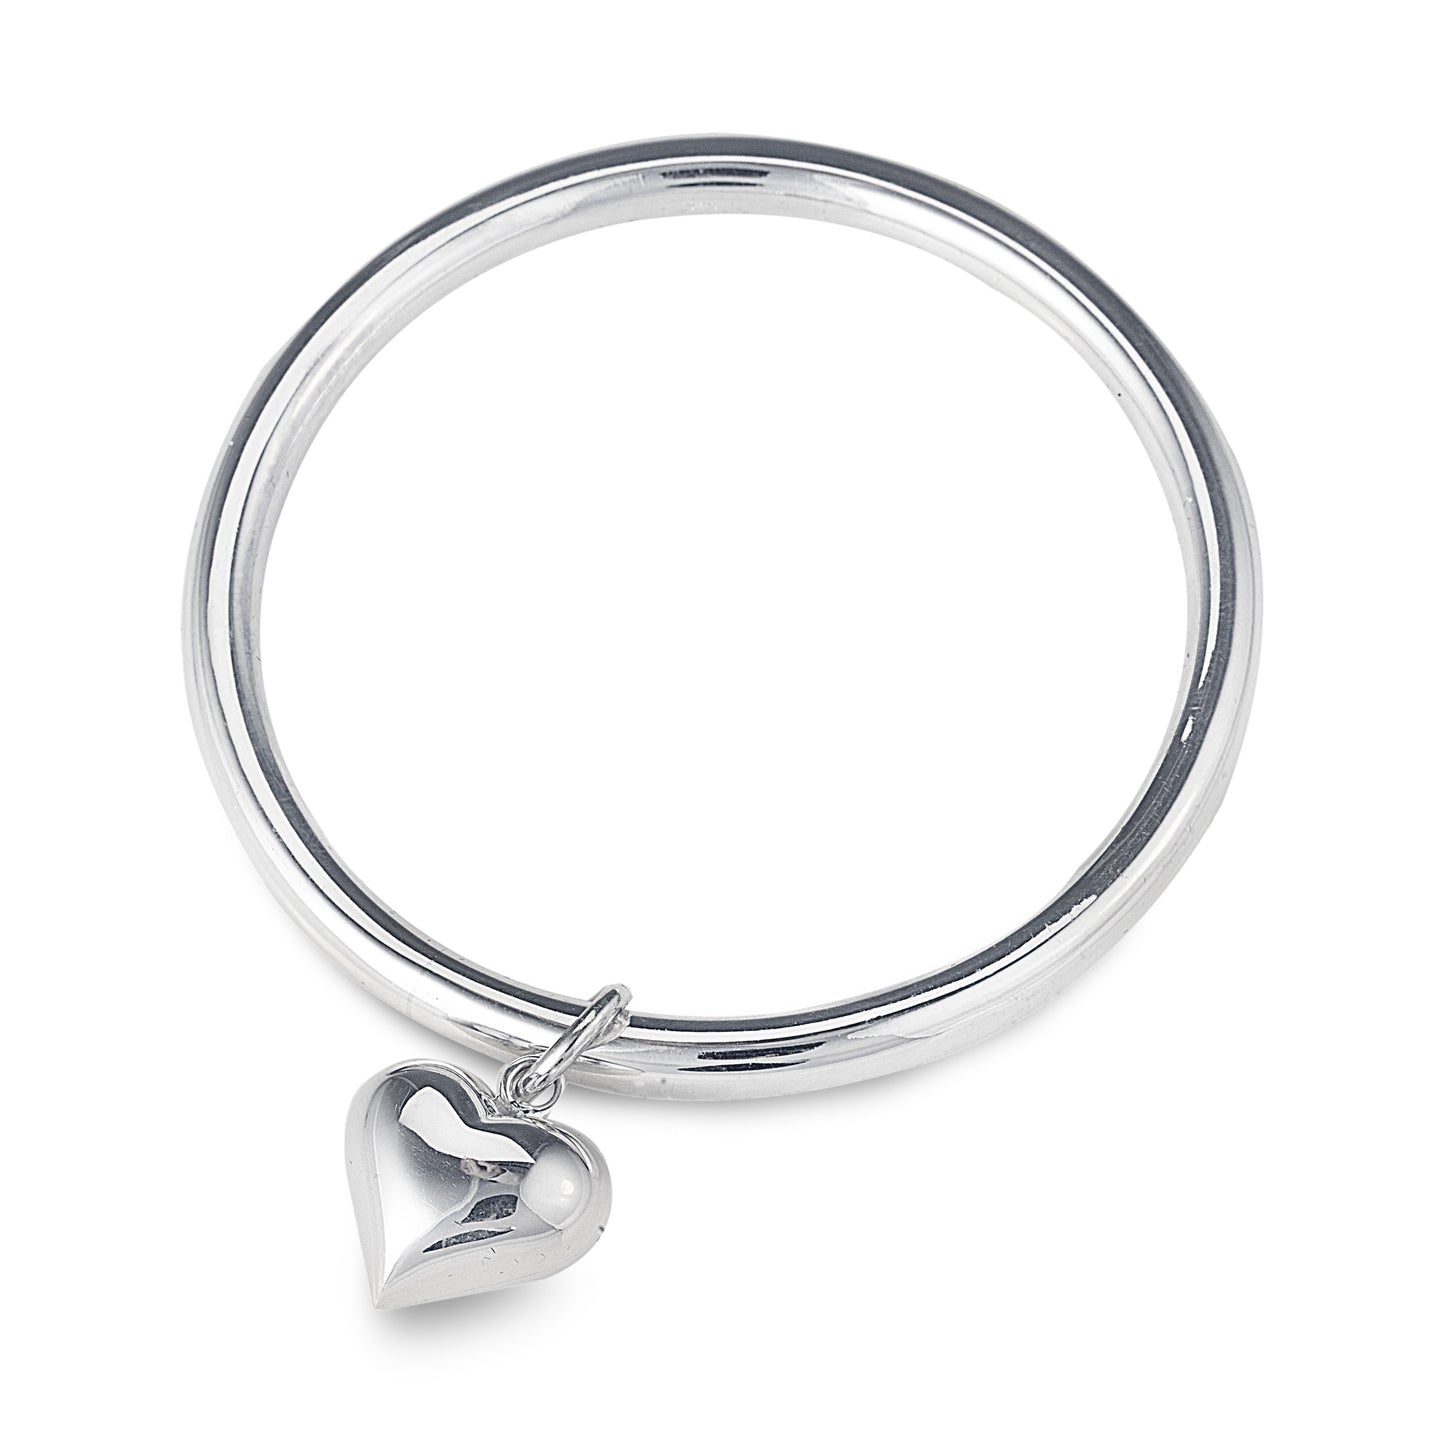 The Eden Bangle is a single classic bangle in 925 sterling silver featuring a lovely heart charm. The bangle is approximately 6cm in diameter. Large size is also available. Luxury jewellery at affordable prices by Bellagio & Co. Worldwide Shipping plus FREE shipping for orders over $150 in Australia. 